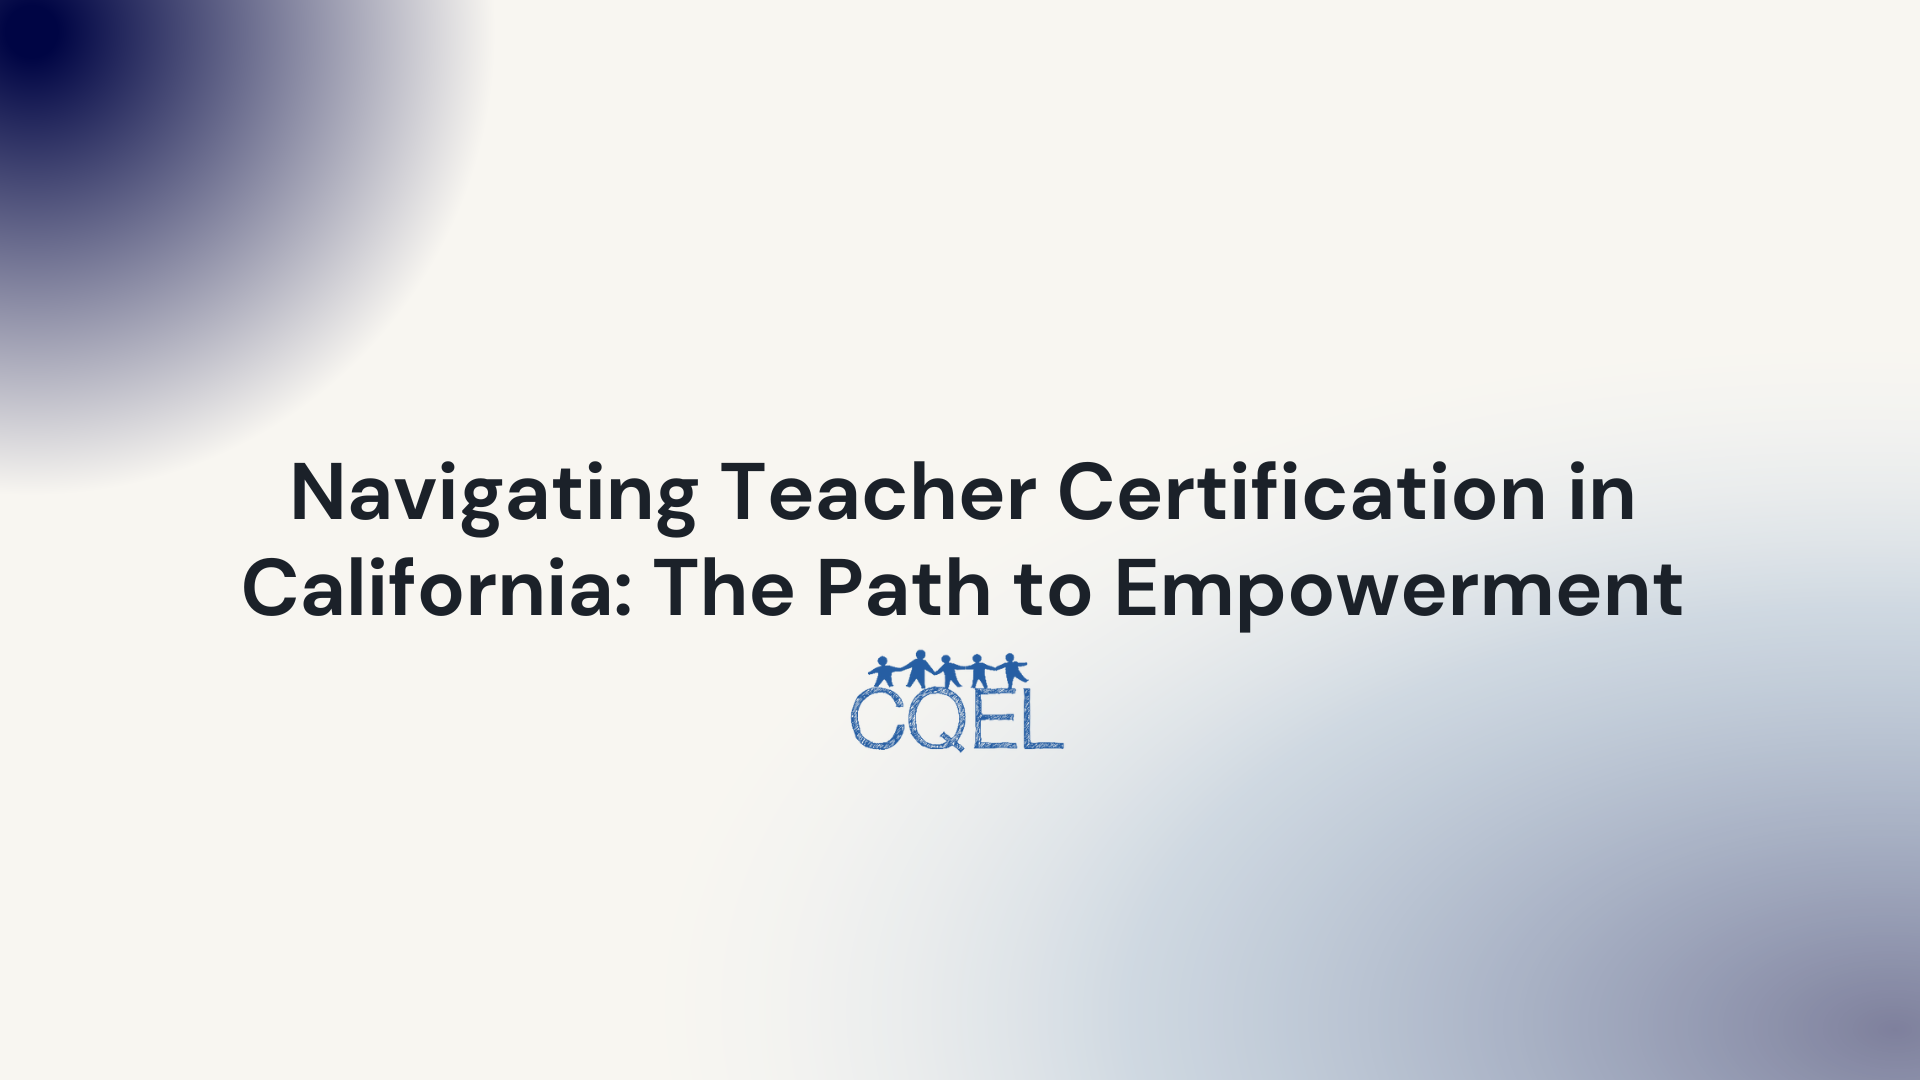 Navigating Teacher Certification in California: The Path to Empowerment